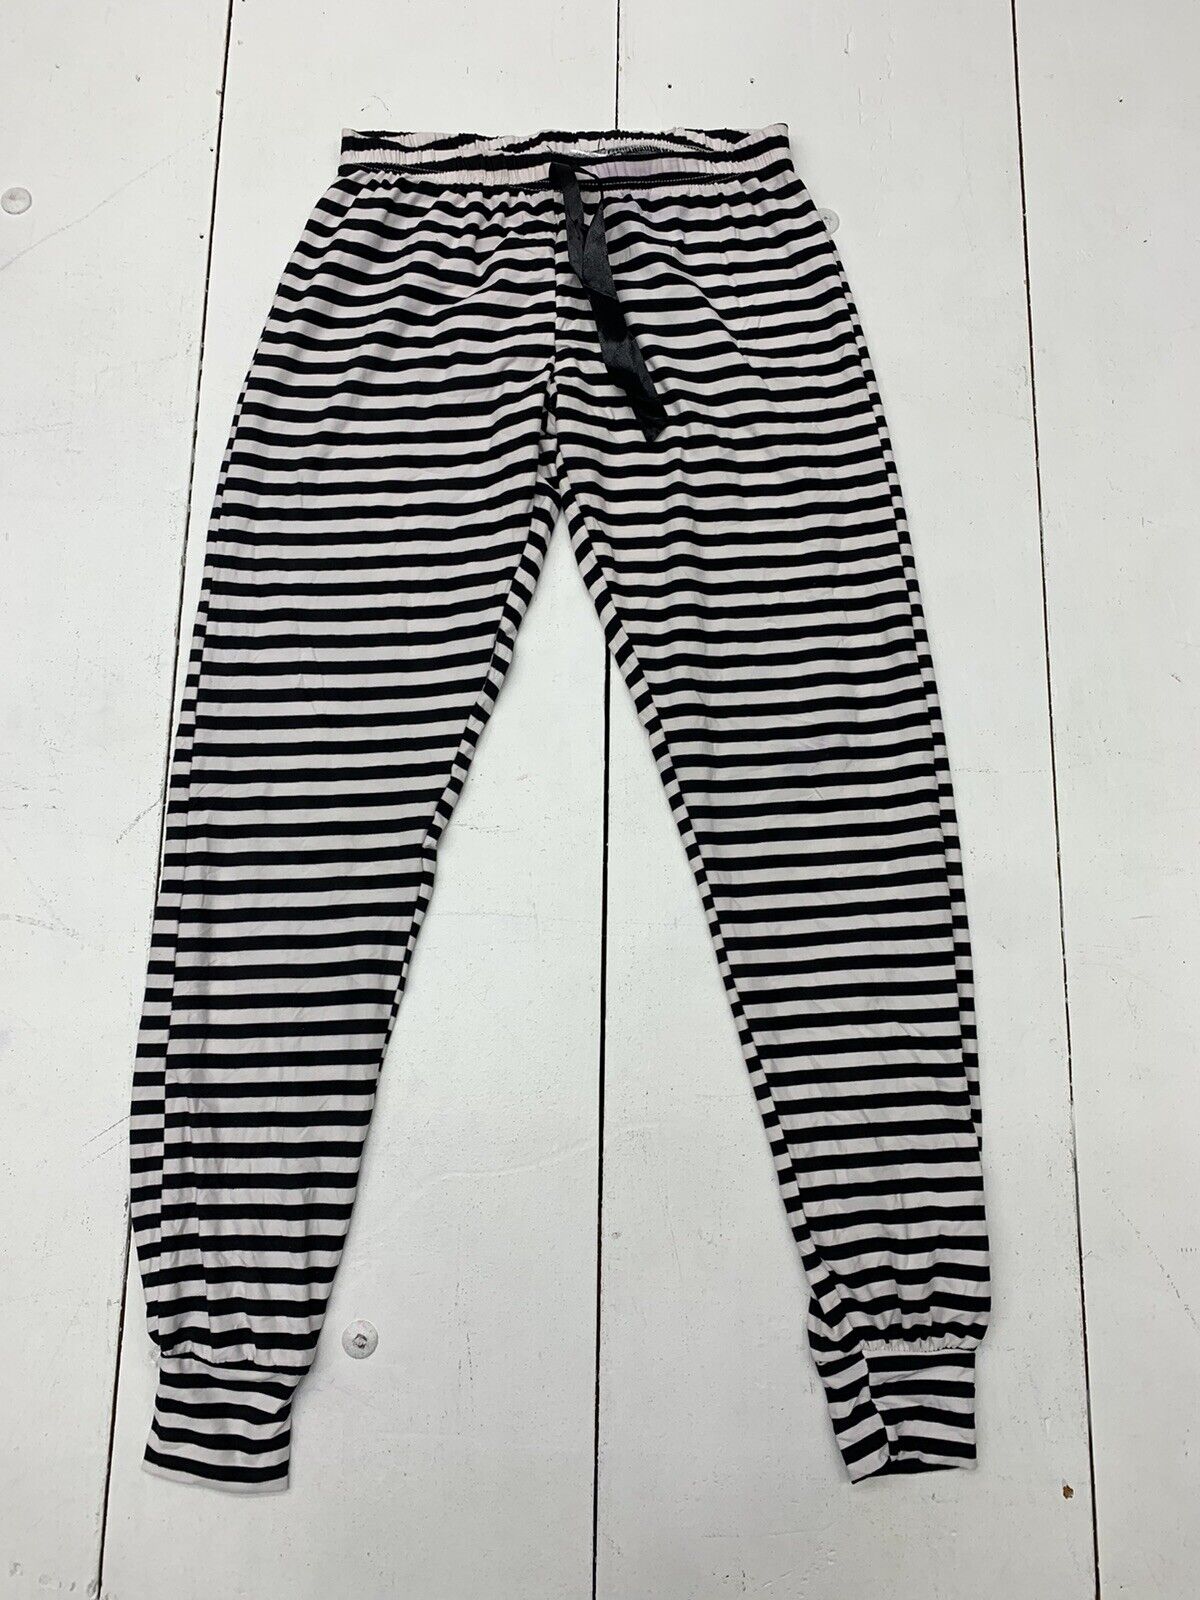 Unbranded Womens Black White Striped Pajama Pants Size Small